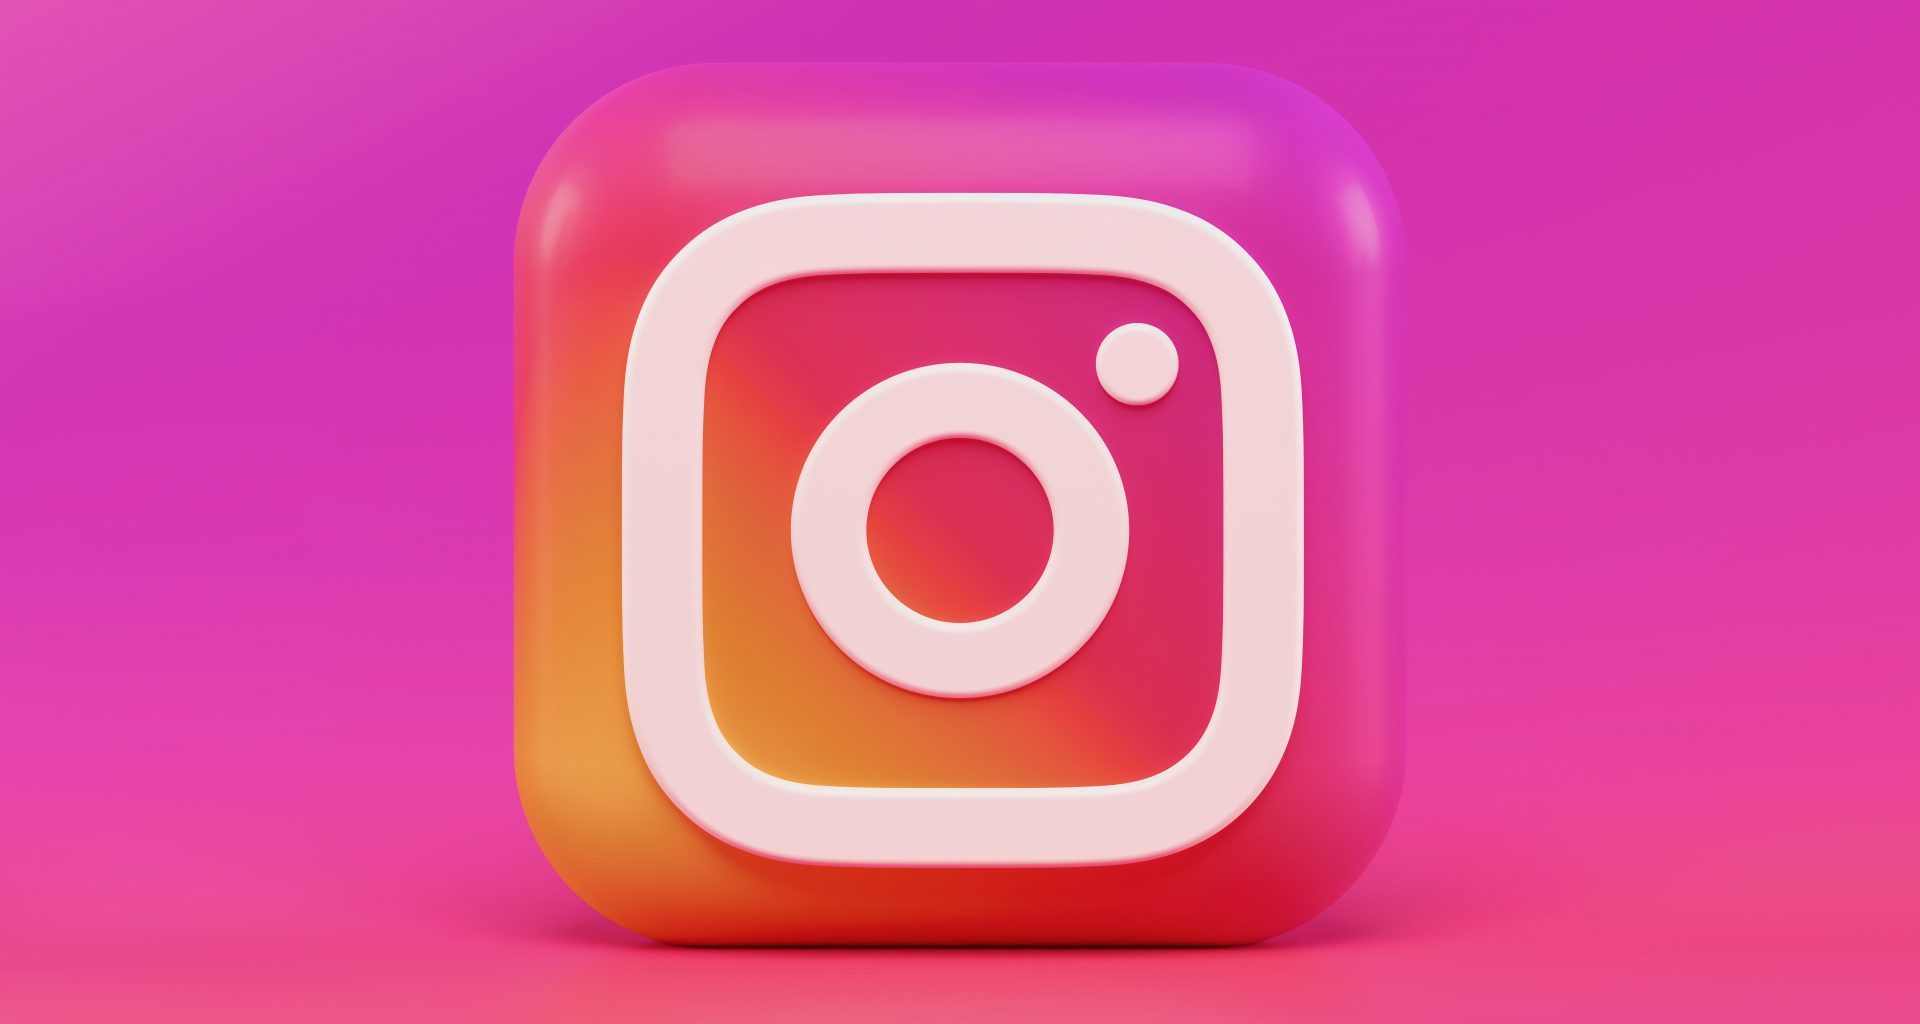 Instagram automatically sets accounts of under 16s to private